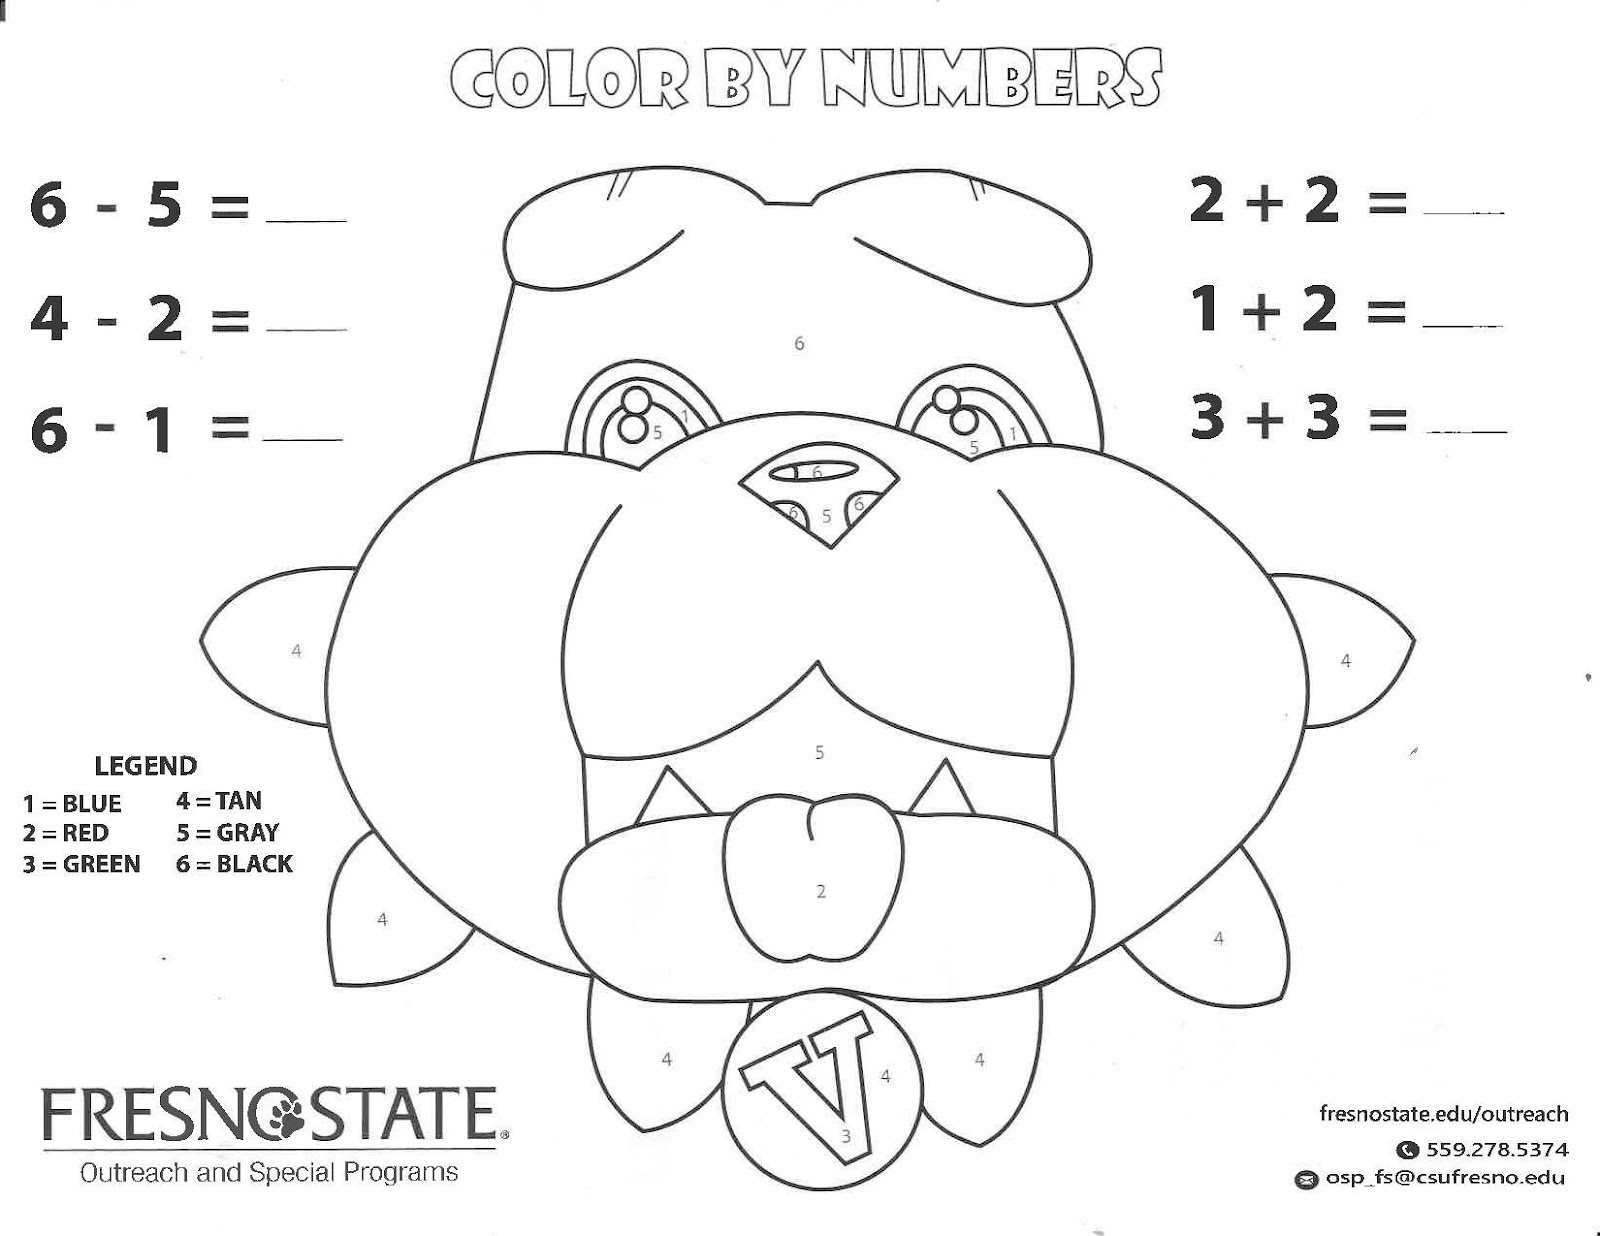 color by numbers activity worksheet for k-8 students